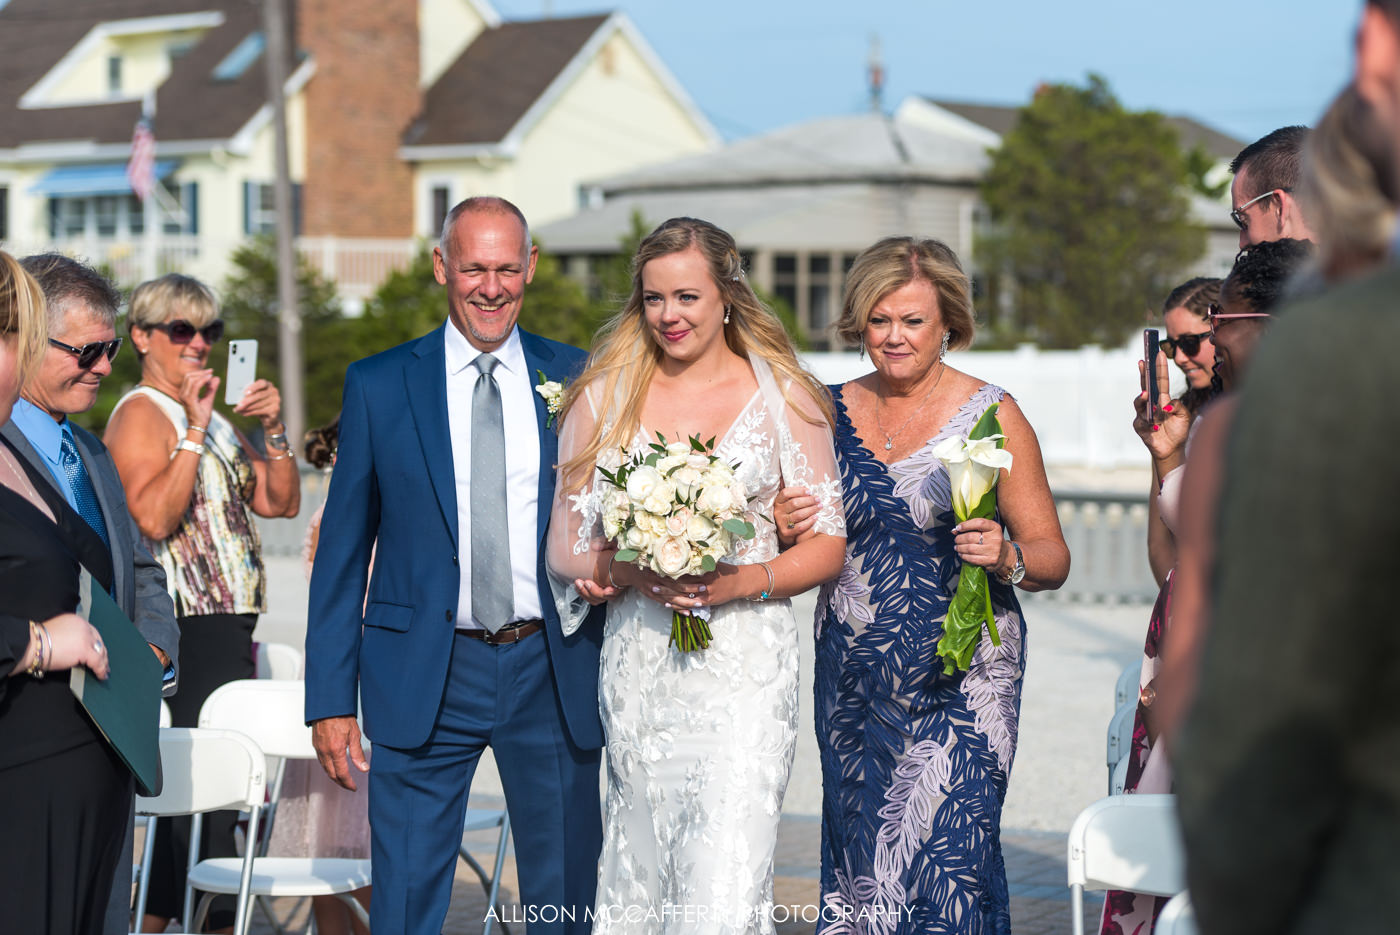 Parents walking their daughter down the aisle on her wedding day at Brant Beach Yacht Club 